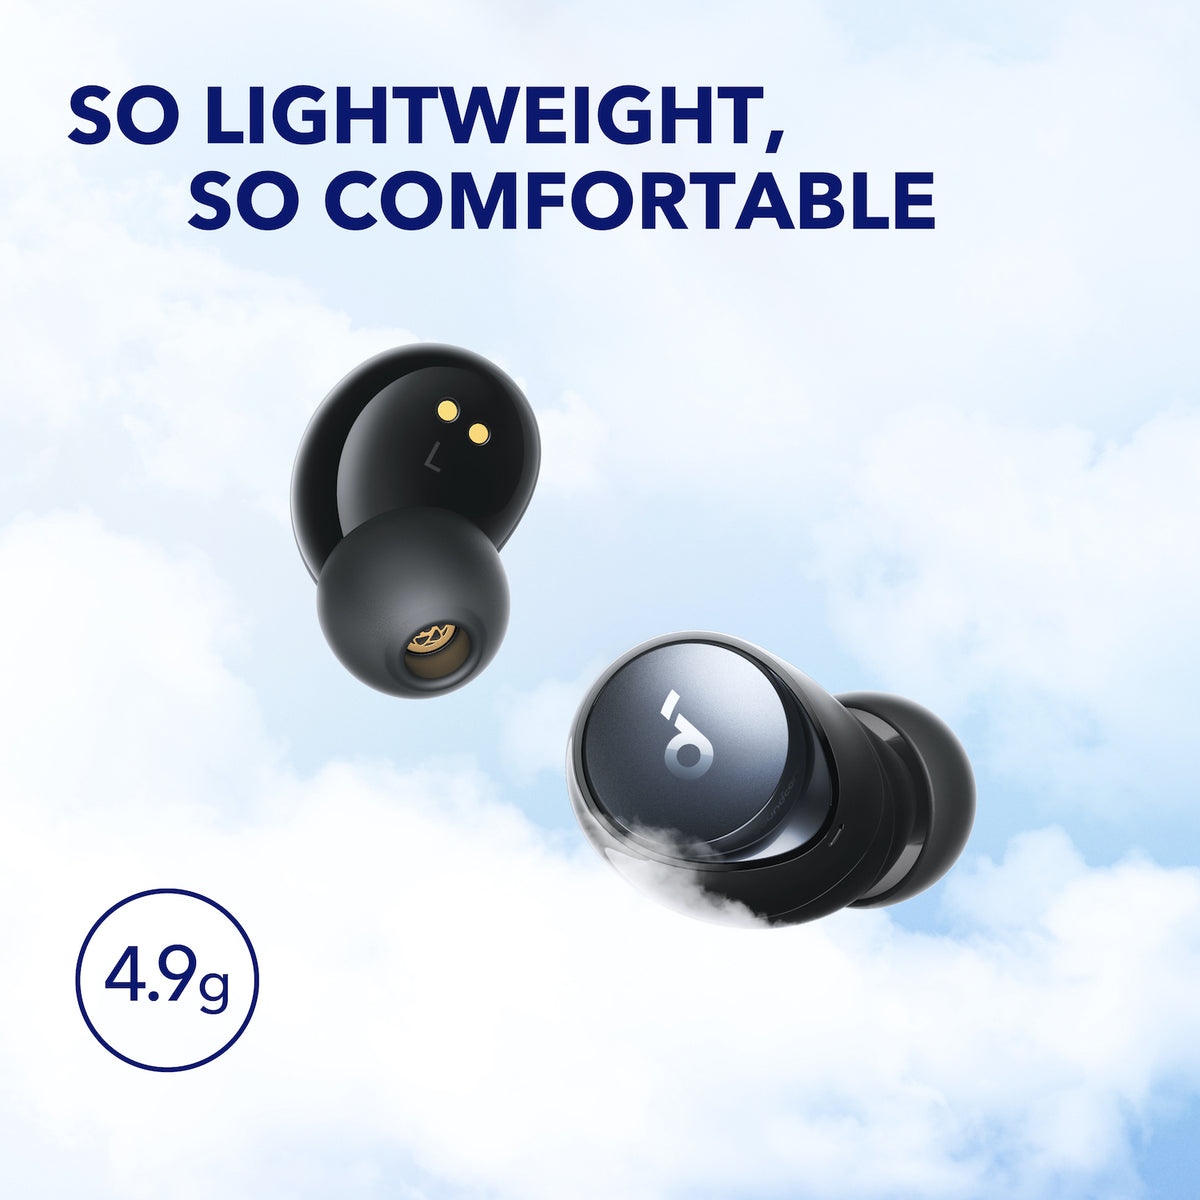 Buy Space A40 All-New Noise Cancelling Earbuds - soundcore CA